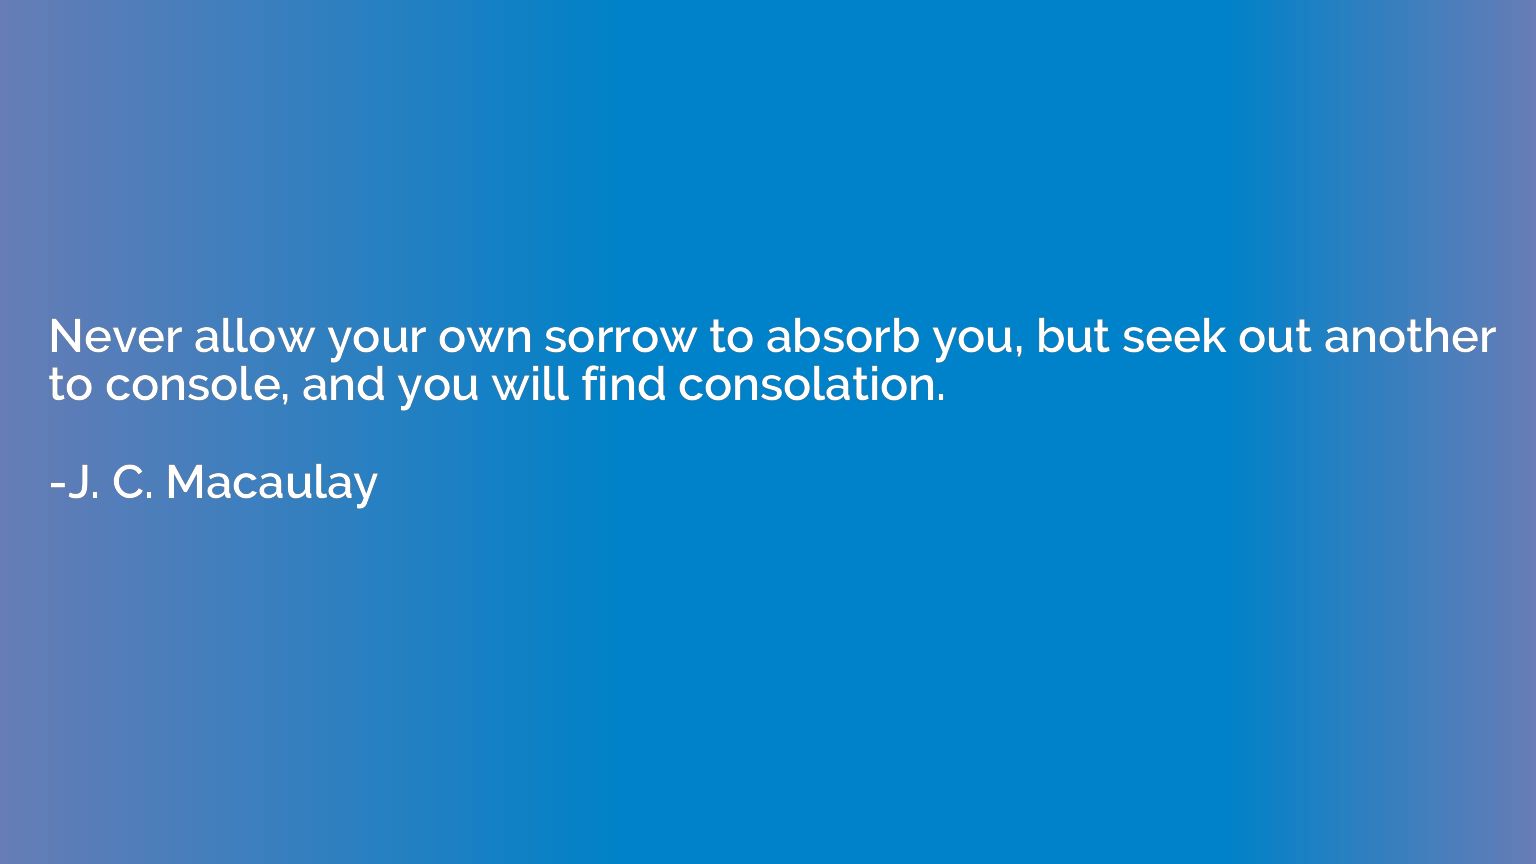 Never allow your own sorrow to absorb you, but seek out anot